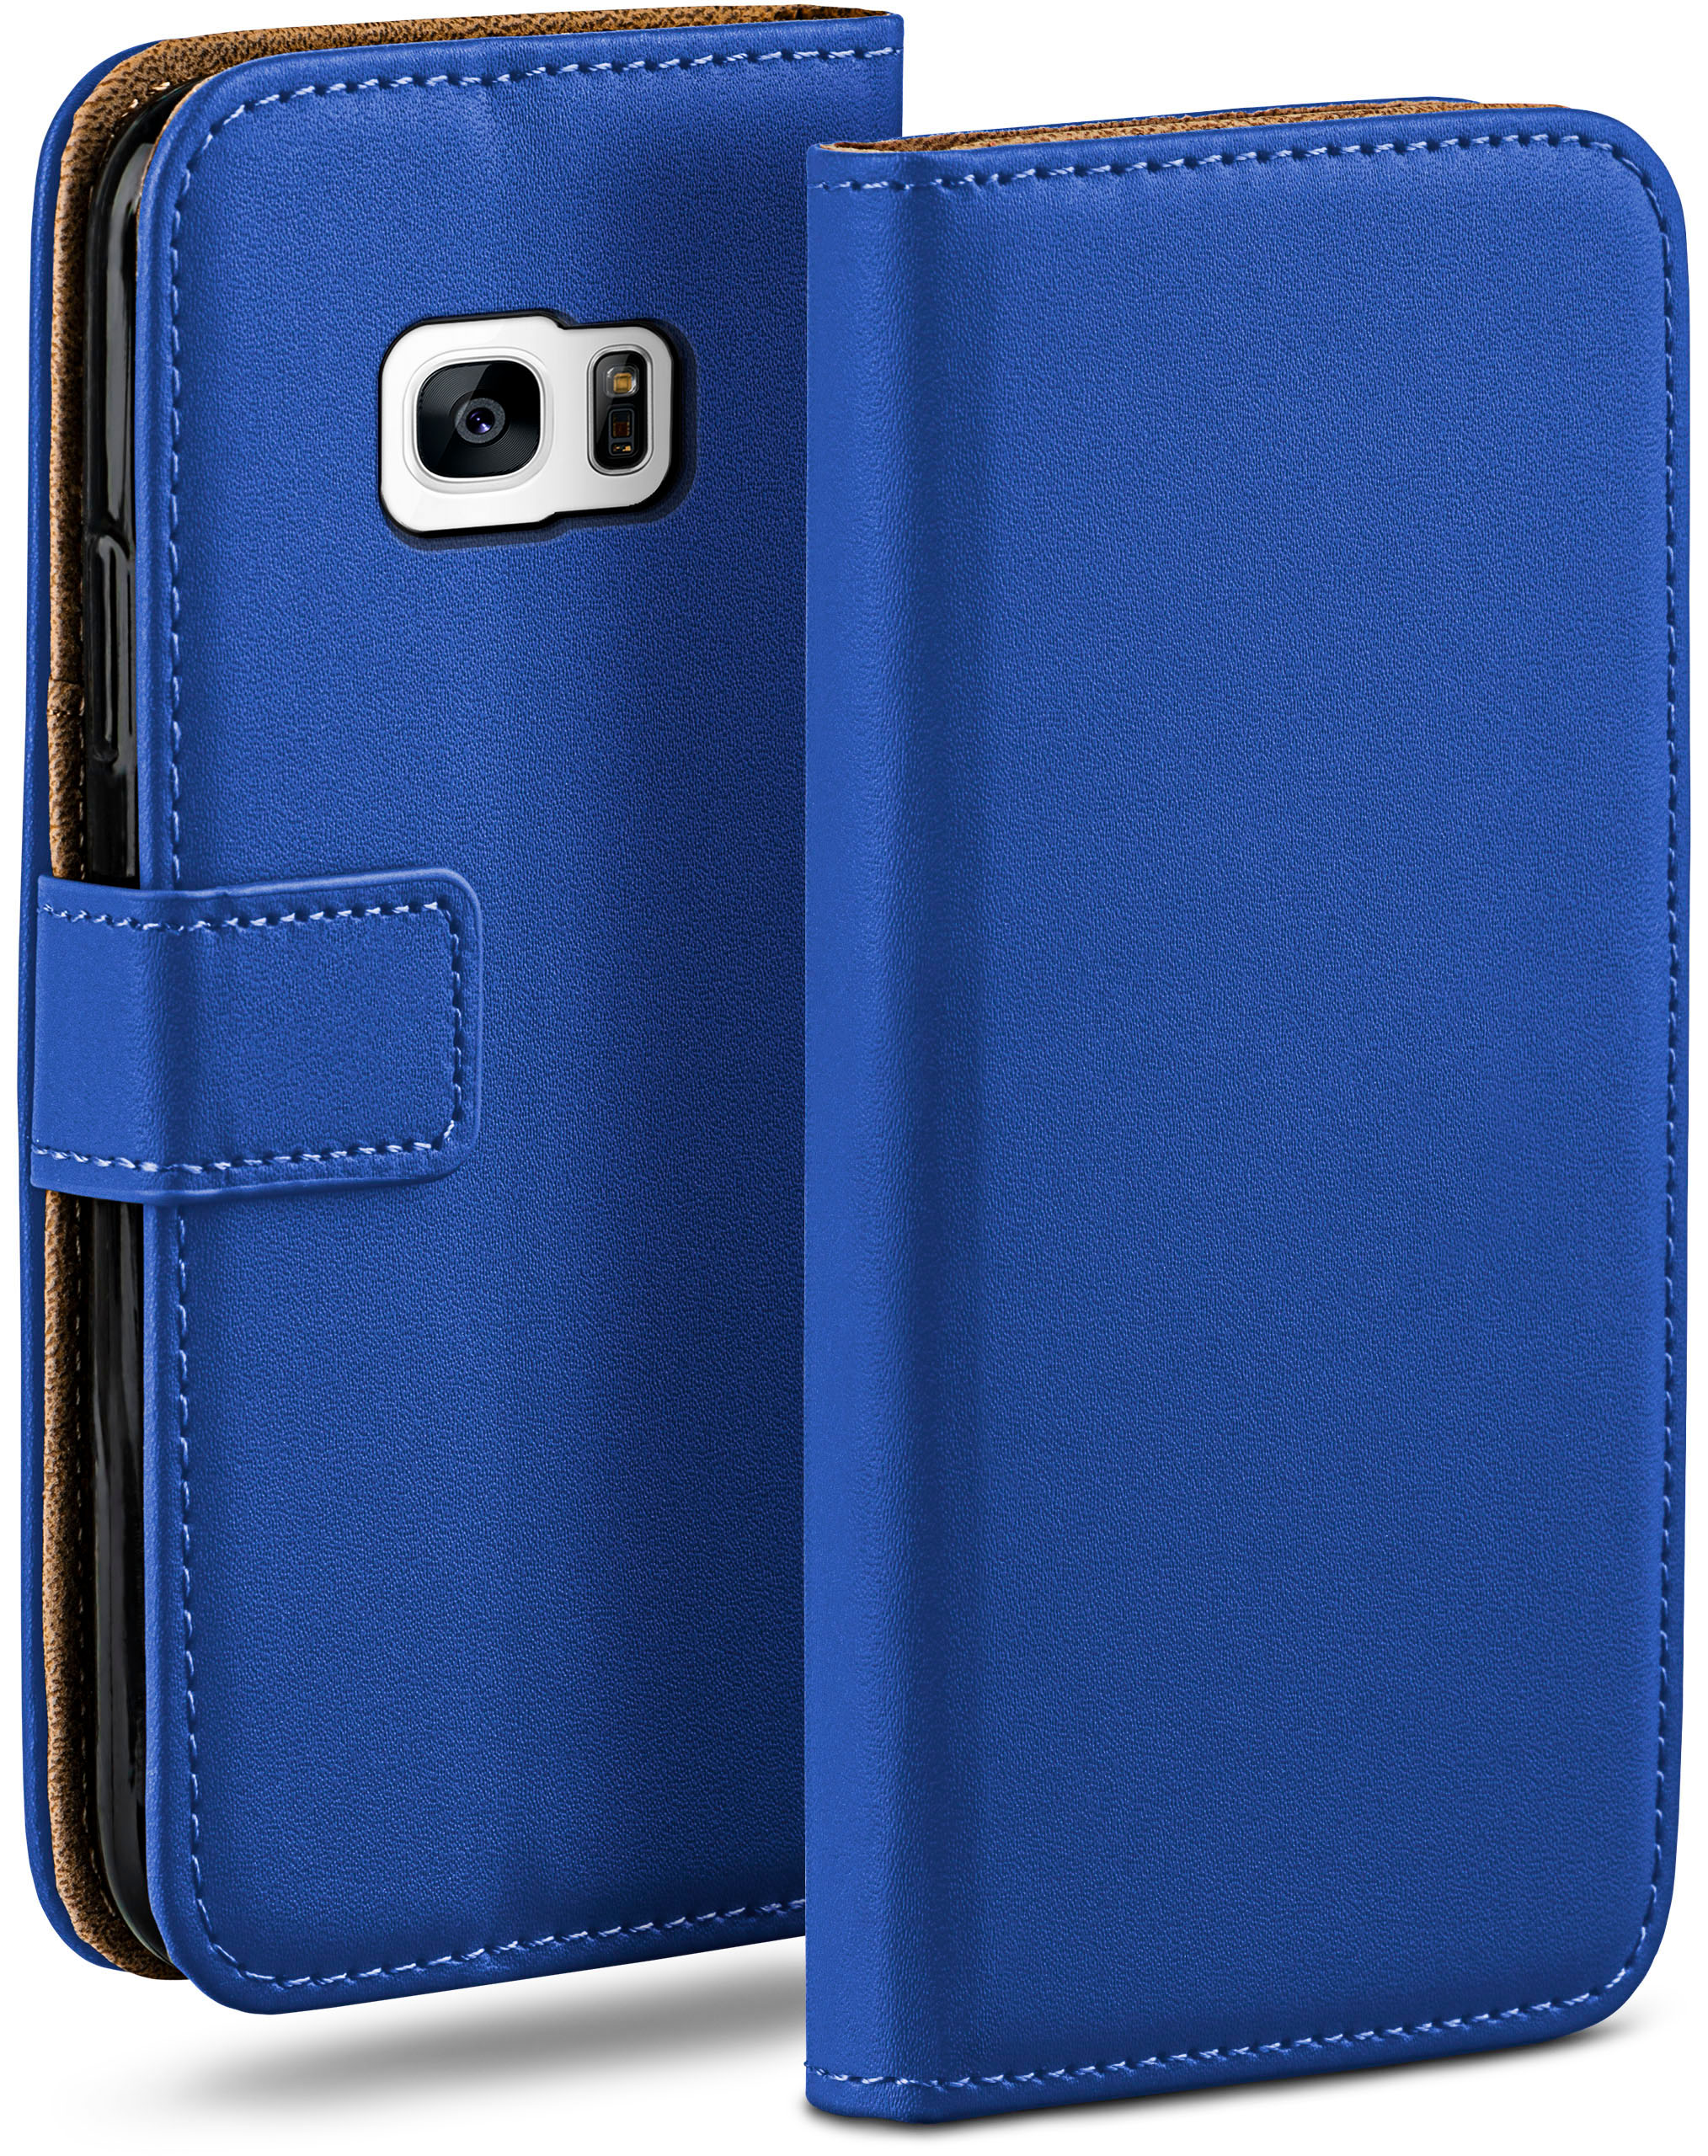 Case, MOEX Book S7, Bookcover, Royal-Blue Samsung, Galaxy